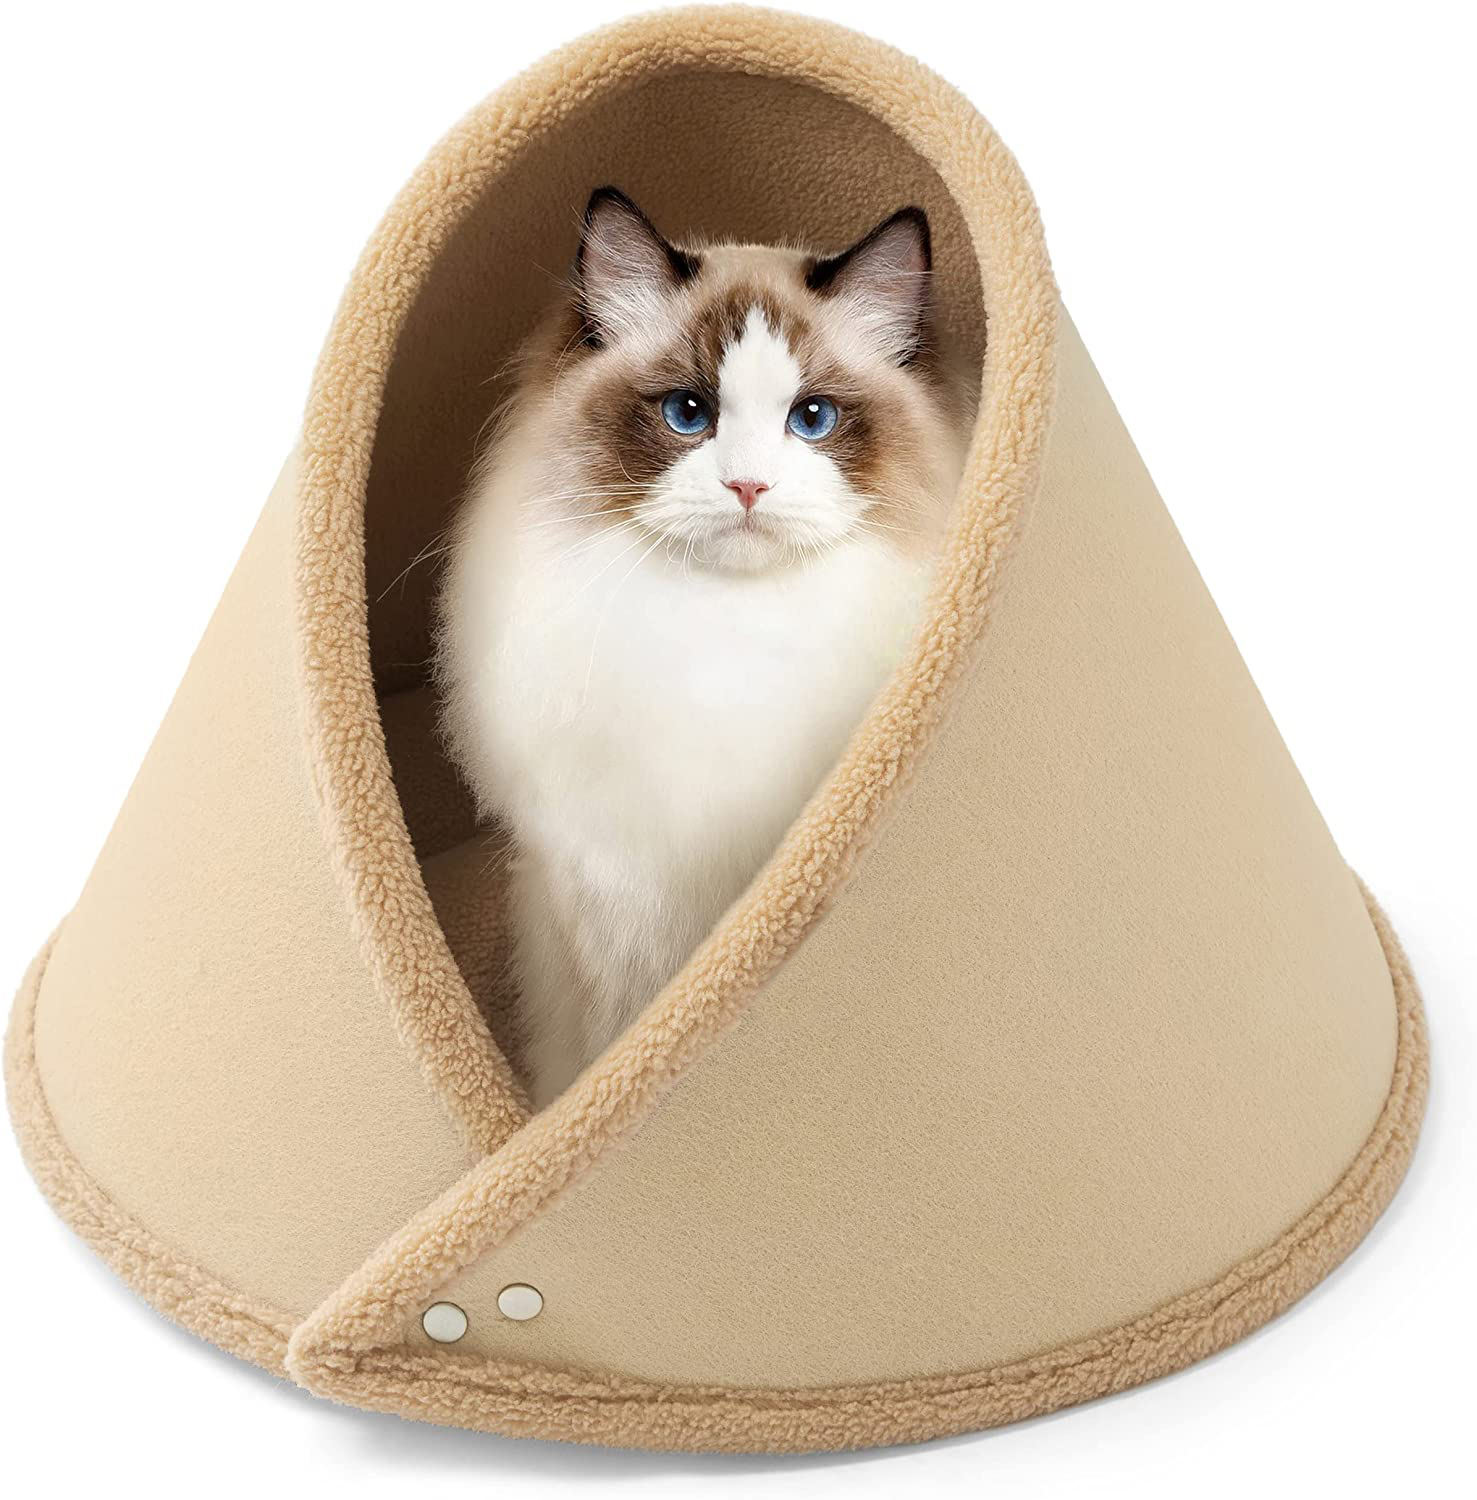 New Comfortable Fluffy And Felt Pet Bed For Cat Small Dogs